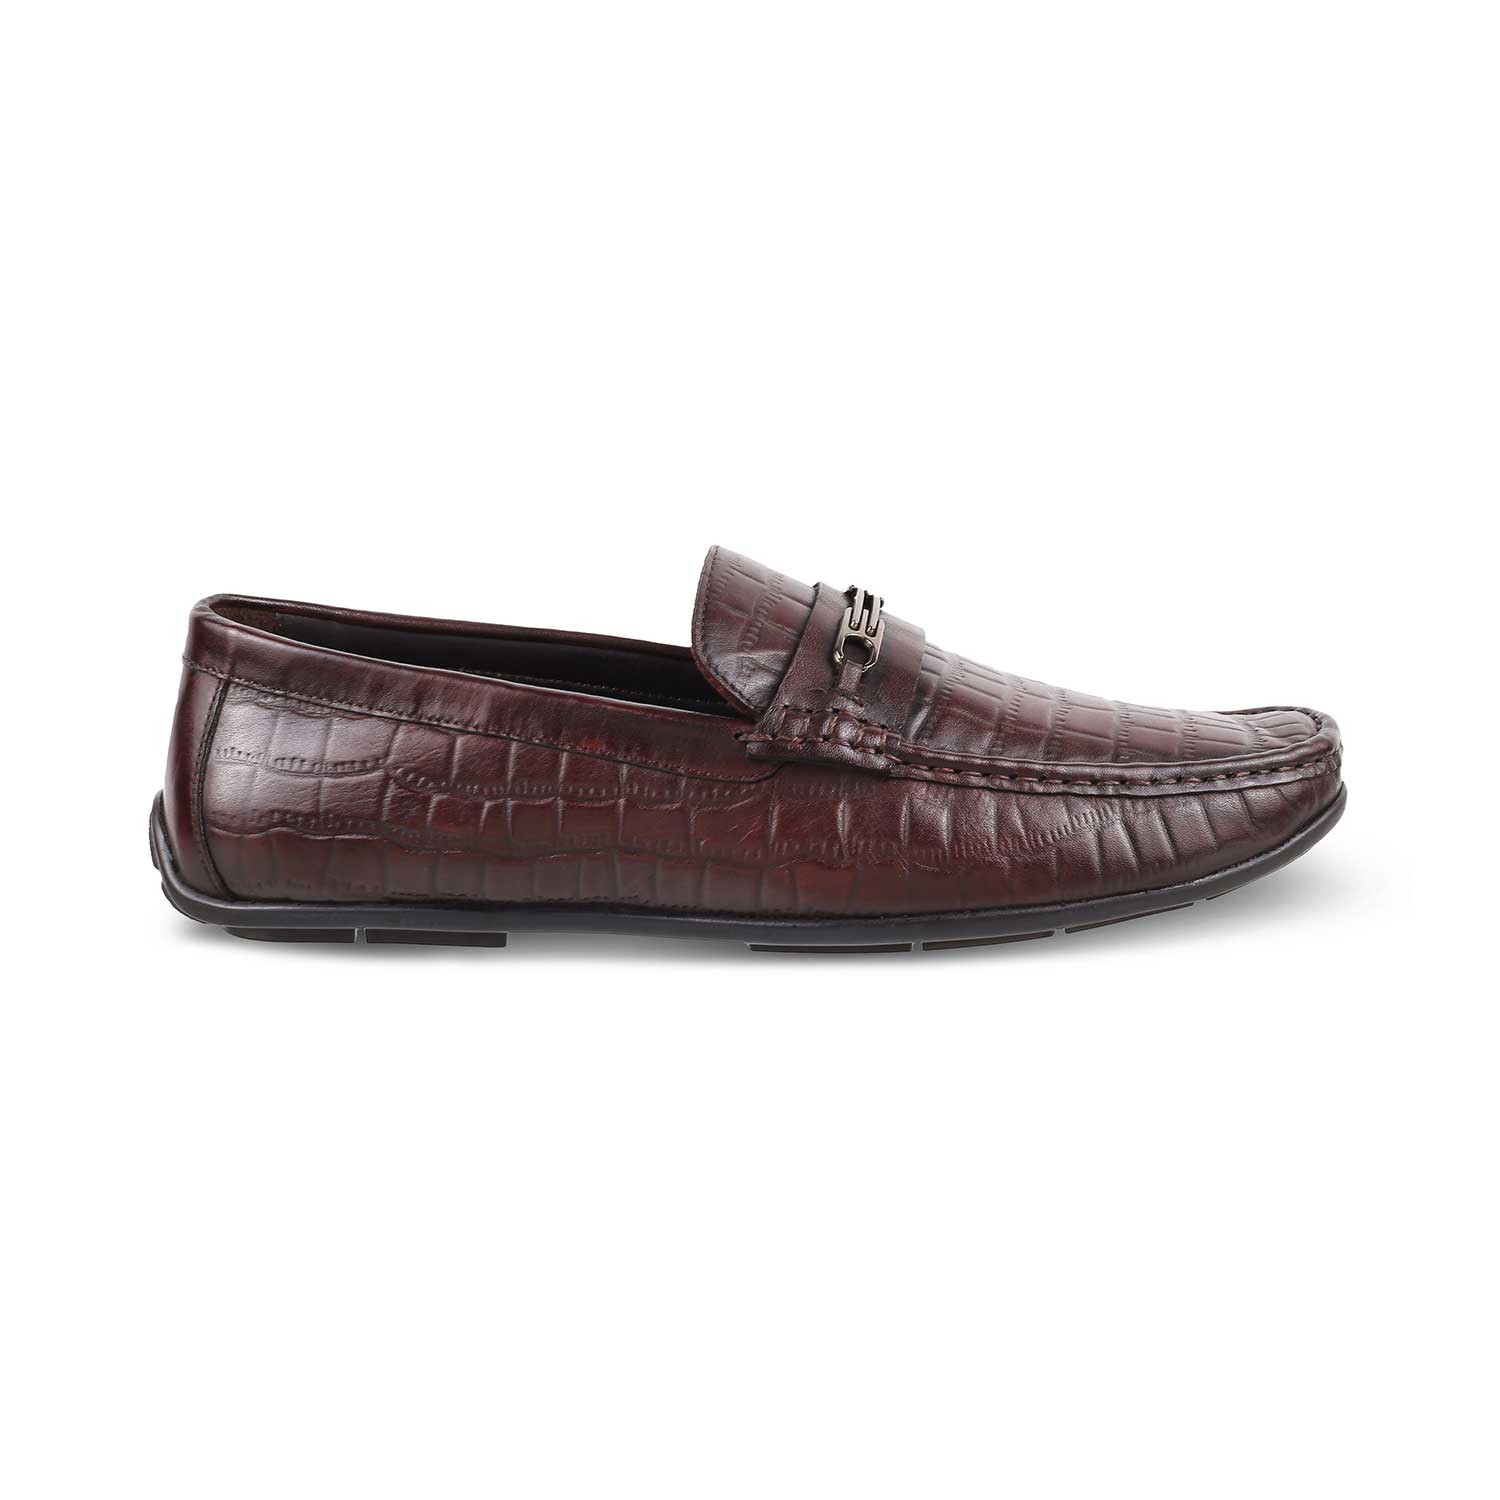 Tresmode-The York Brown Men's Leather Driving Loafers Tresmode-Tresmode